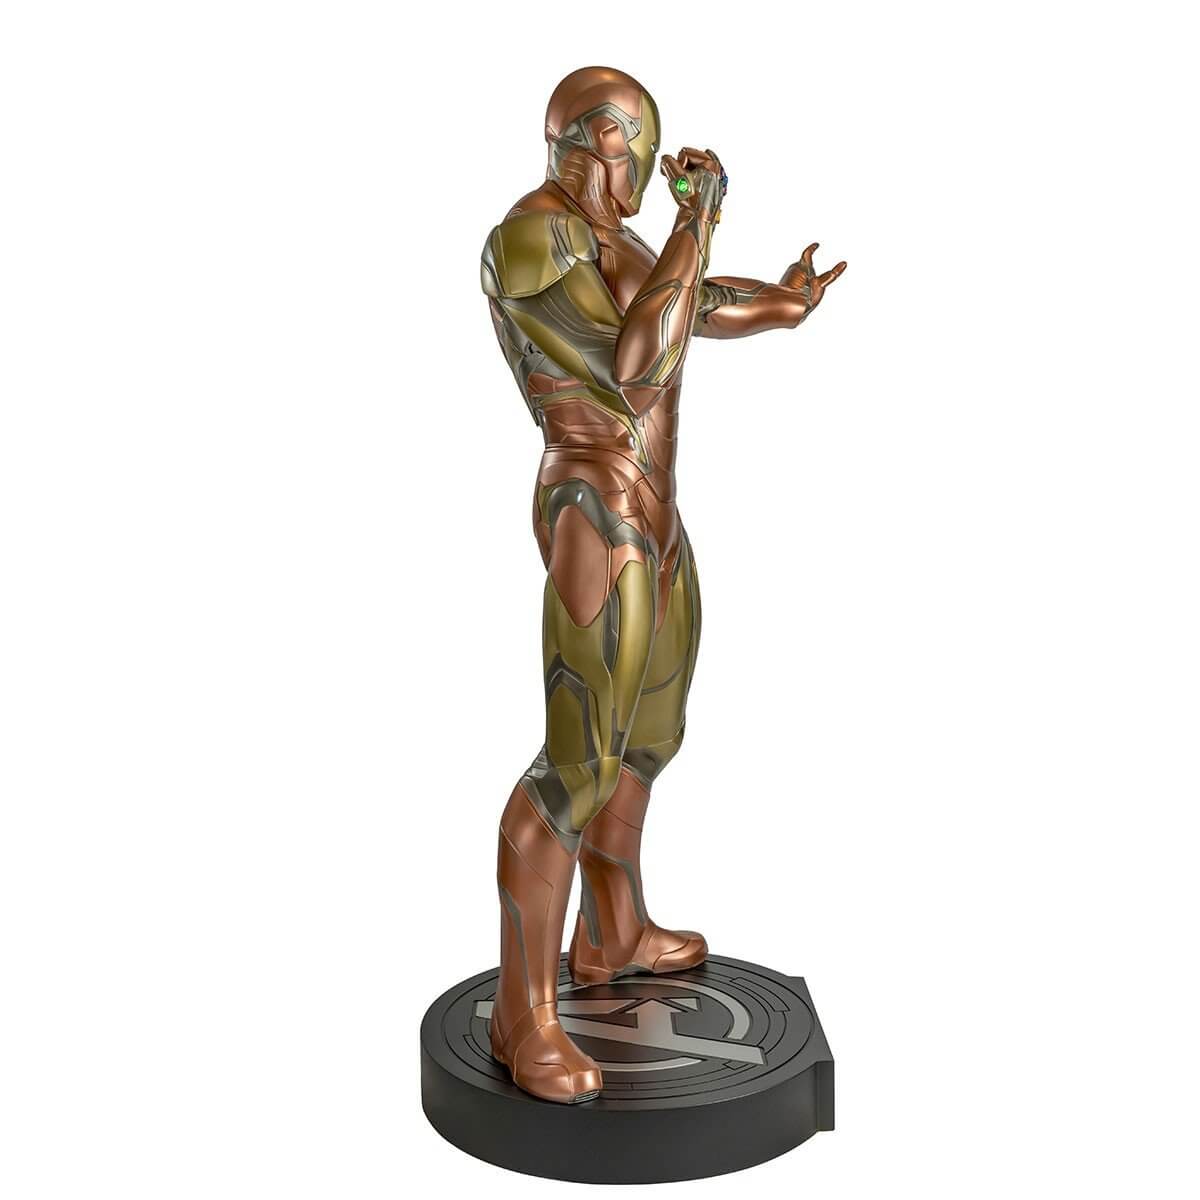 Endgame Iron Man Mark 85 Life-size Limited Edition Statue - Marvel Collectible